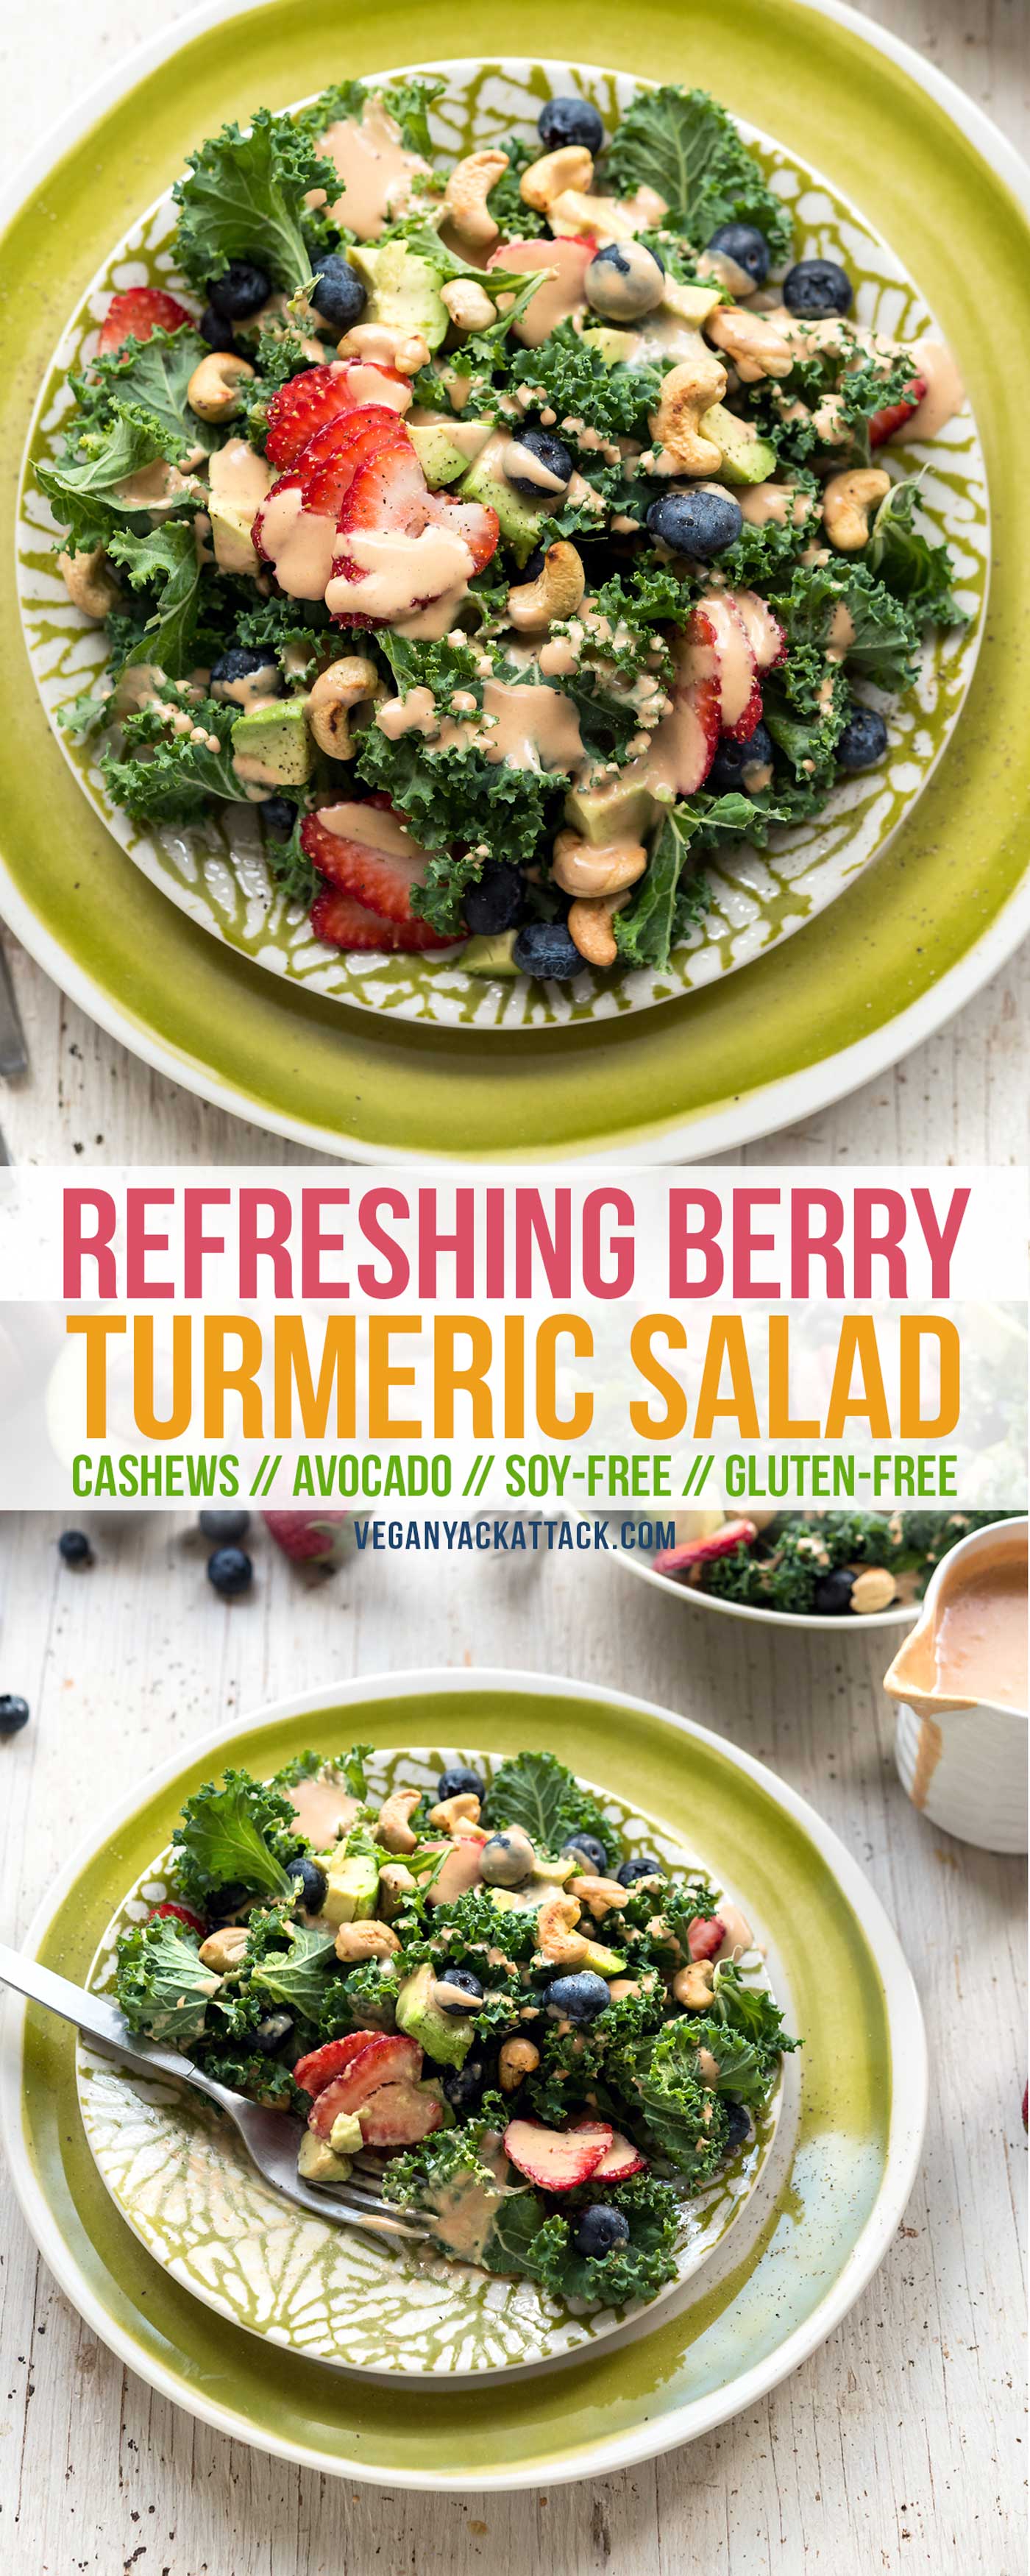 Make this Refreshing Strawberry Turmeric Salad to wow your eyes and stomach with bold colors and flavor! Easy to put together and allergy-friendly.